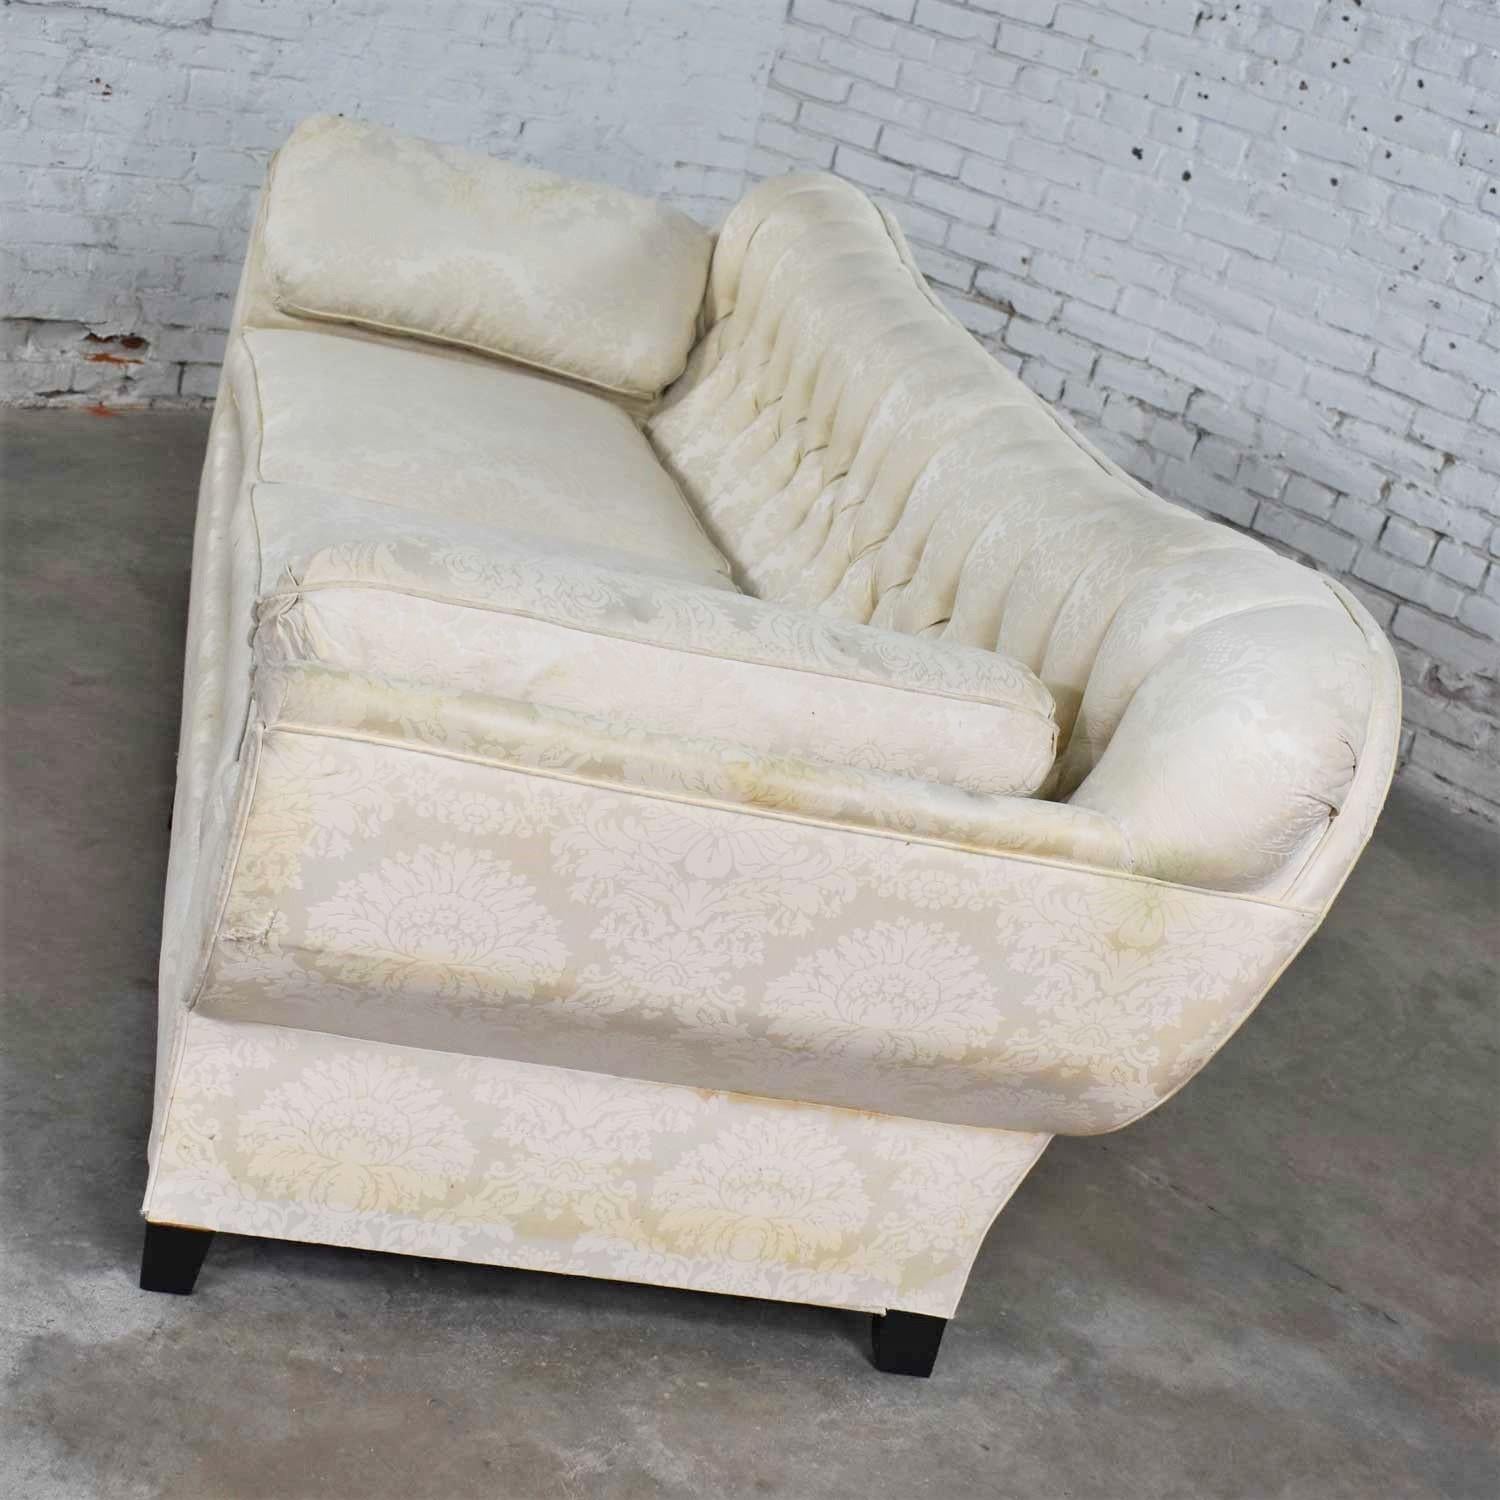 Vintage Art Deco Hollywood Regency Sofa Tufted Back and Concave Pillowed Arms For Sale 2